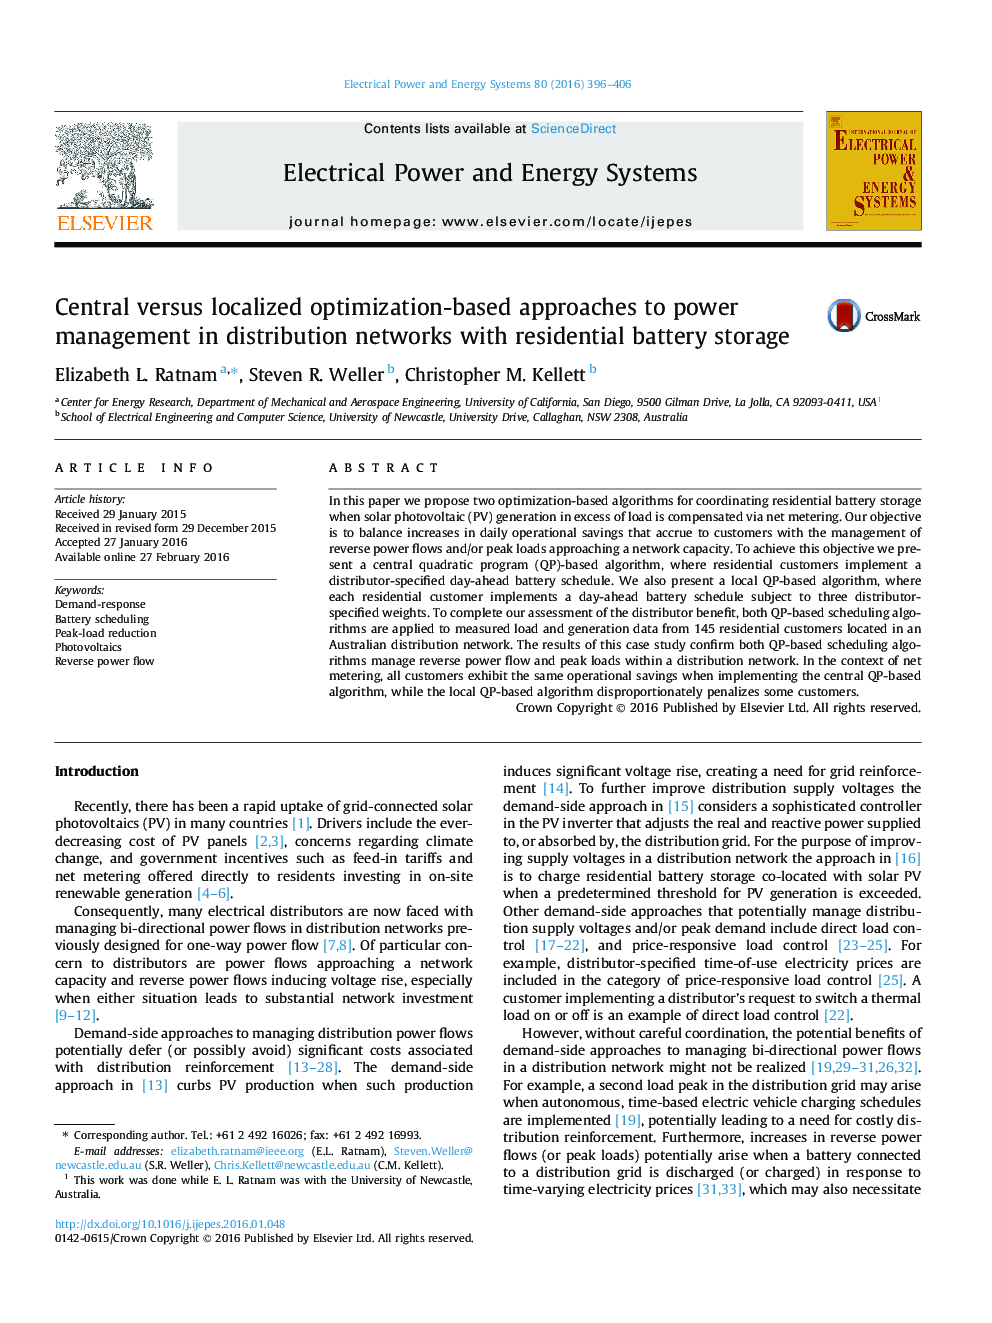 Central versus localized optimization-based approaches to power management in distribution networks with residential battery storage